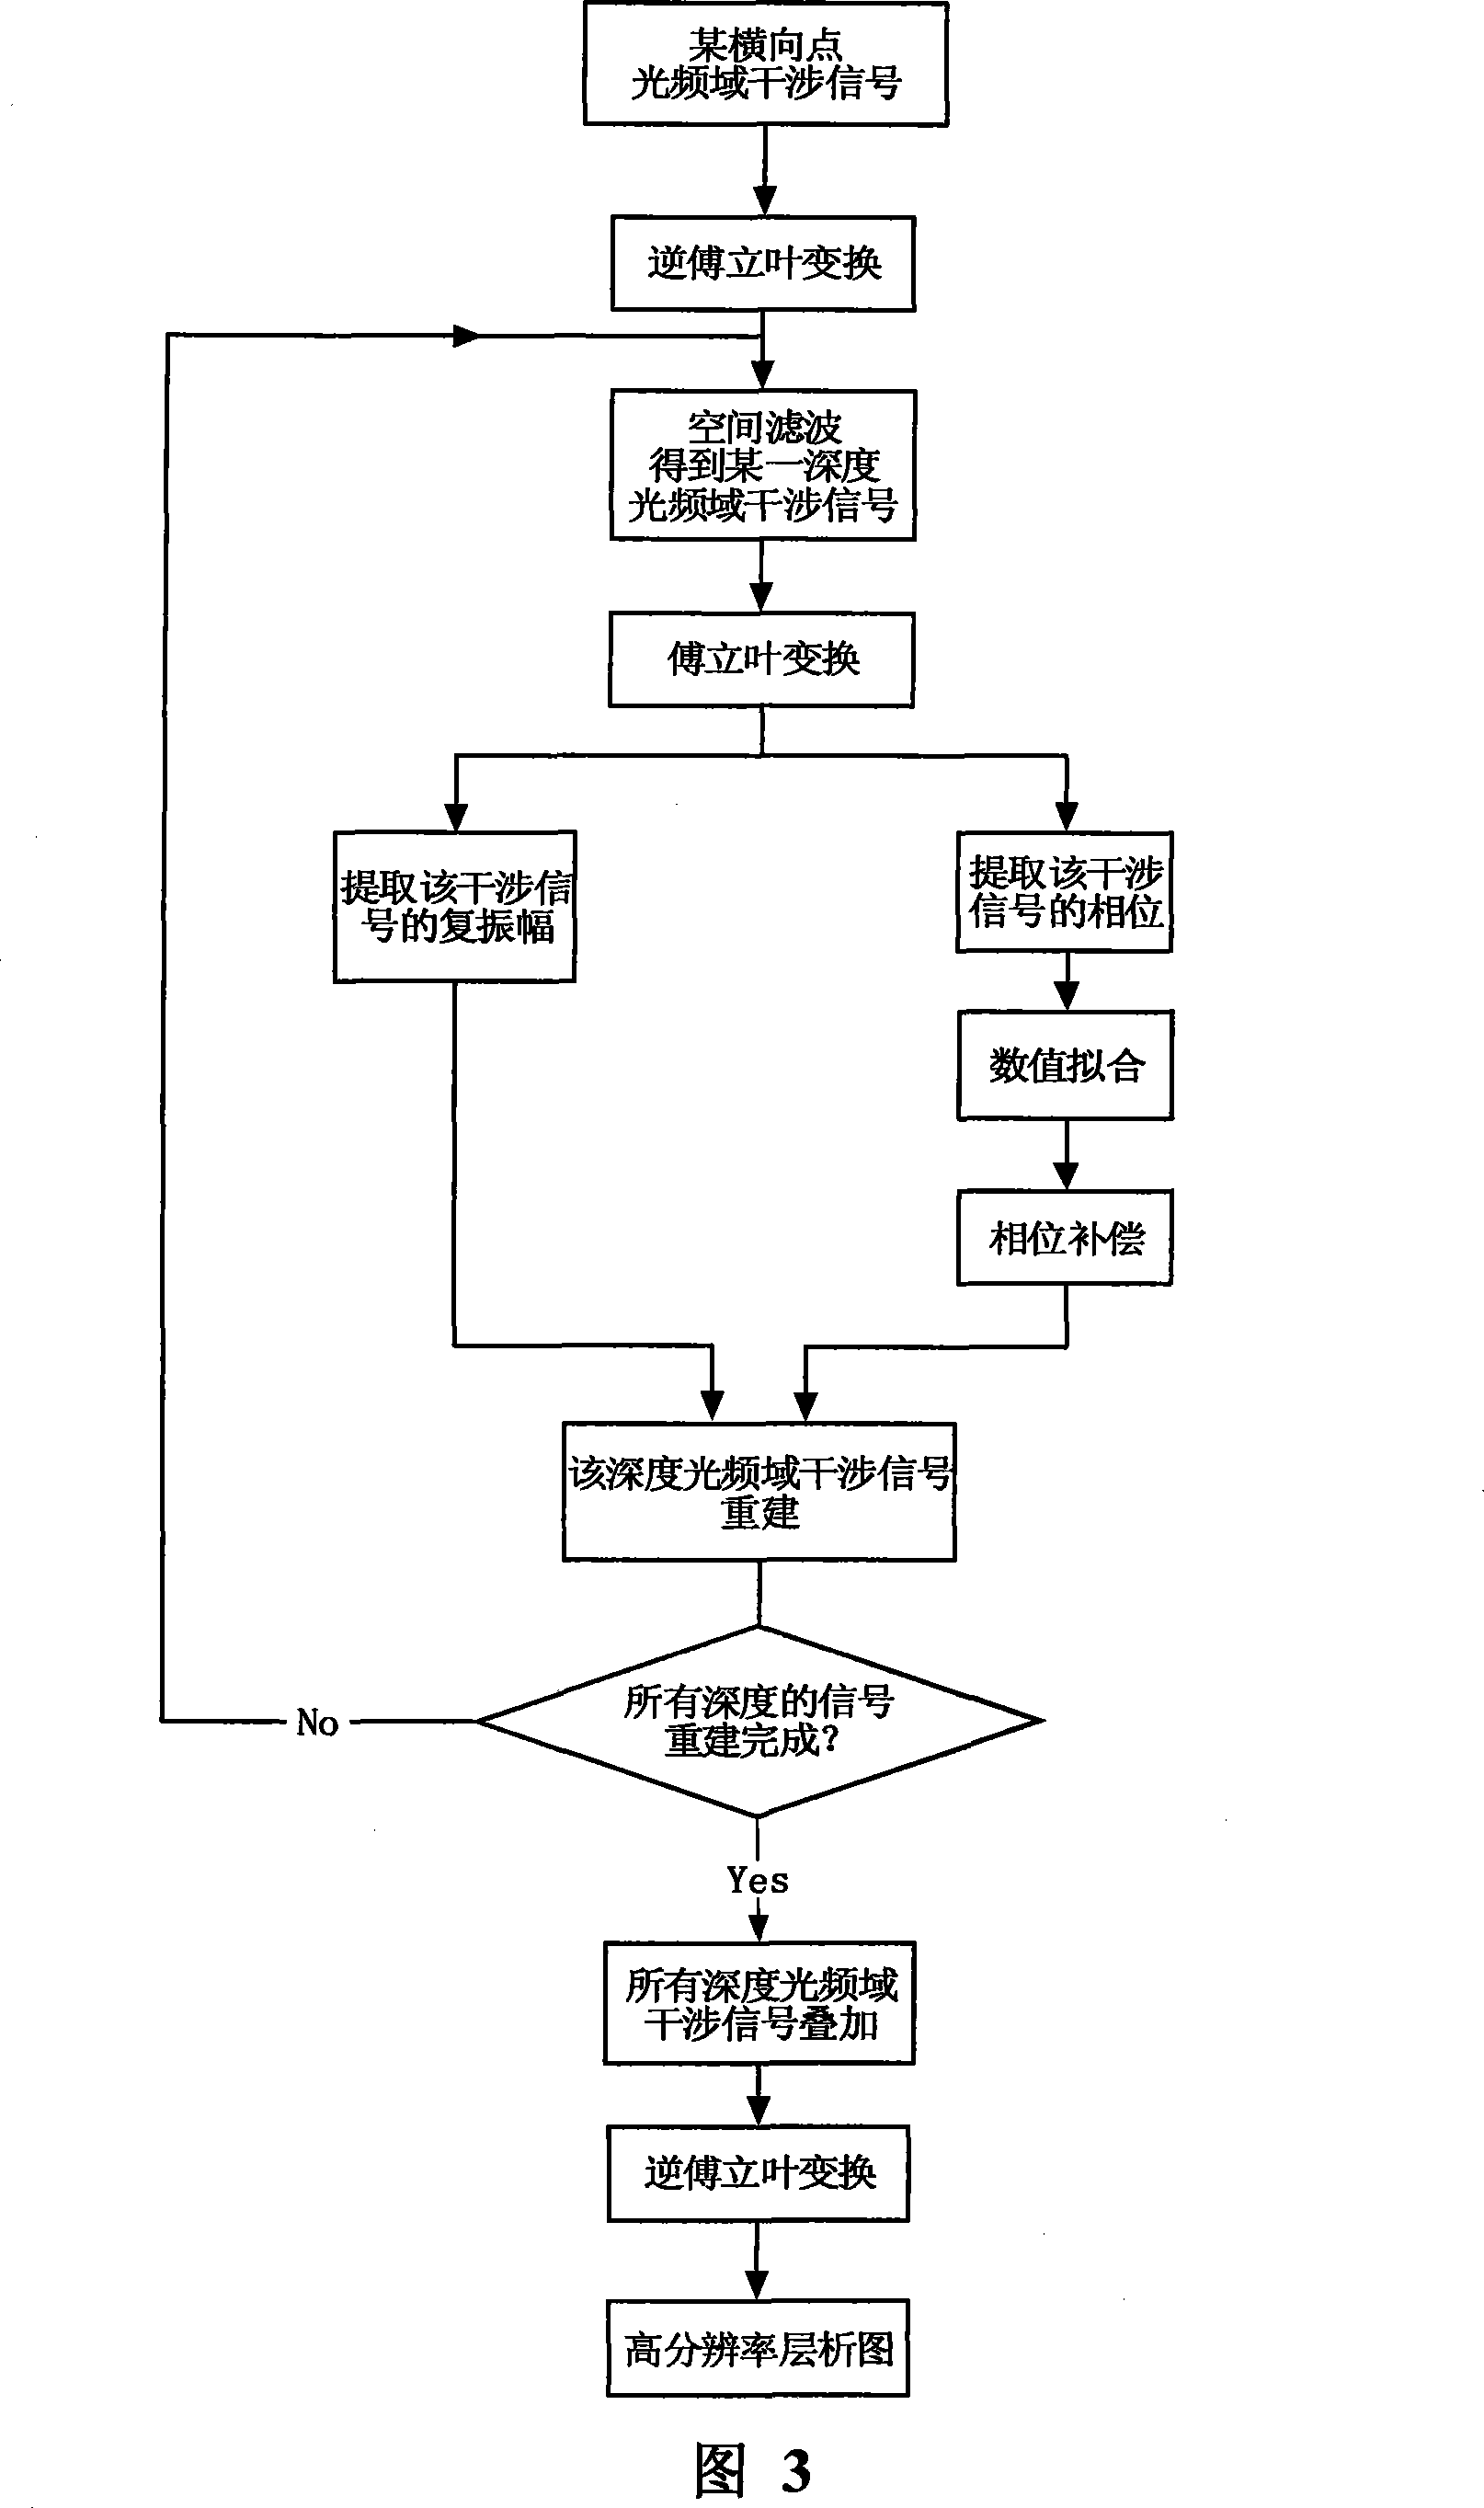 Method for the tomography of high resolution optics coherence